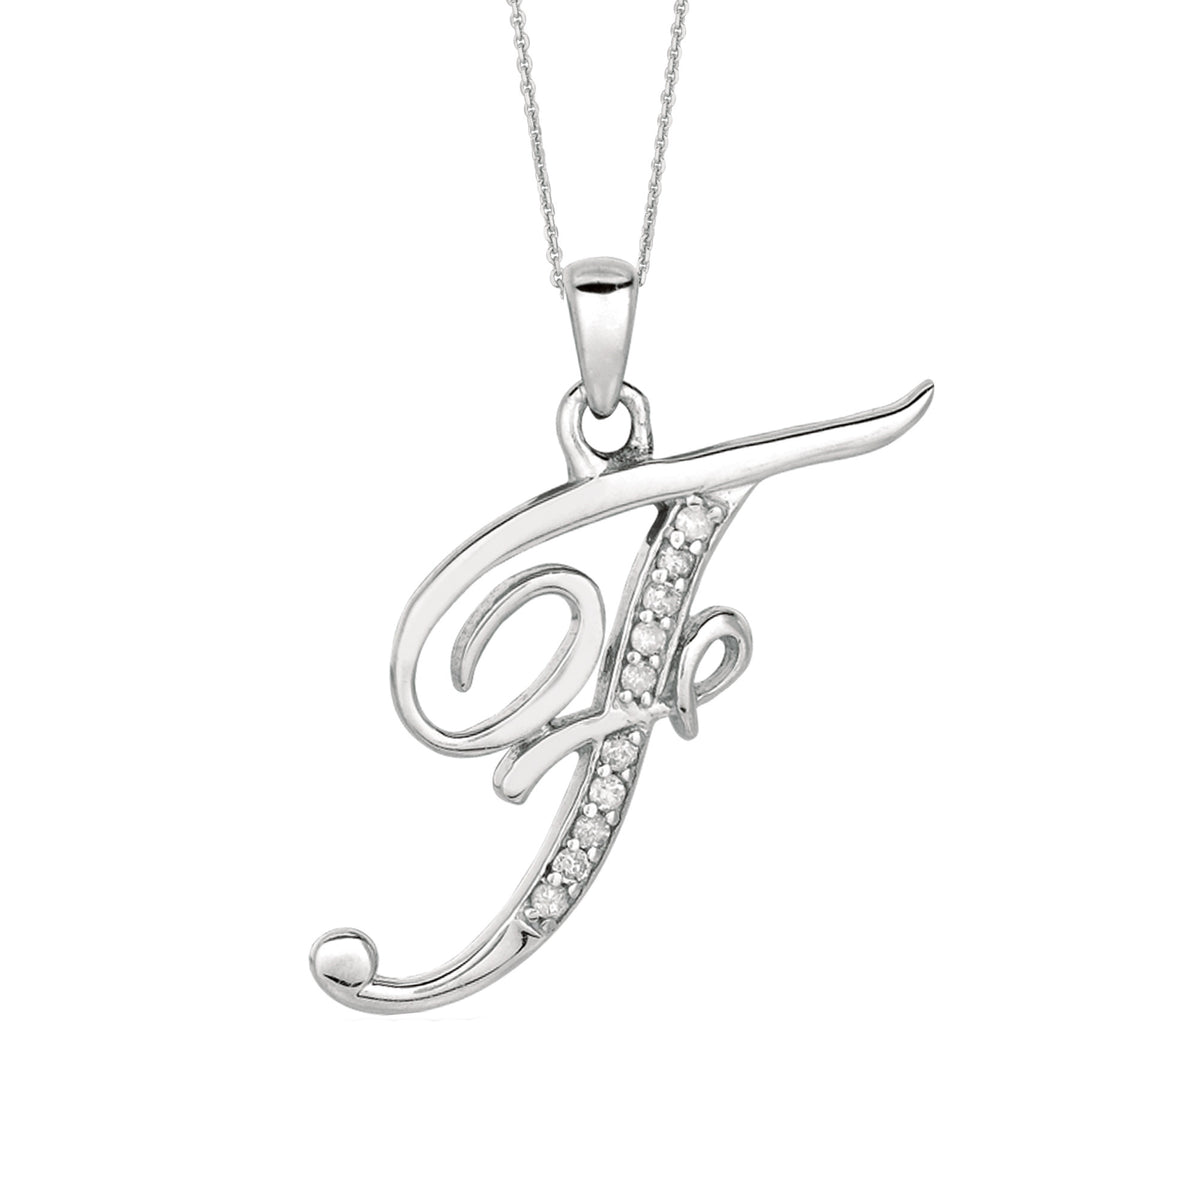 "F" Sterling Silver Rhodium Plated Script Initial Letter With Diamonds On 18 Inch Chain ( 0.05 Tcw) fine designer jewelry for men and women